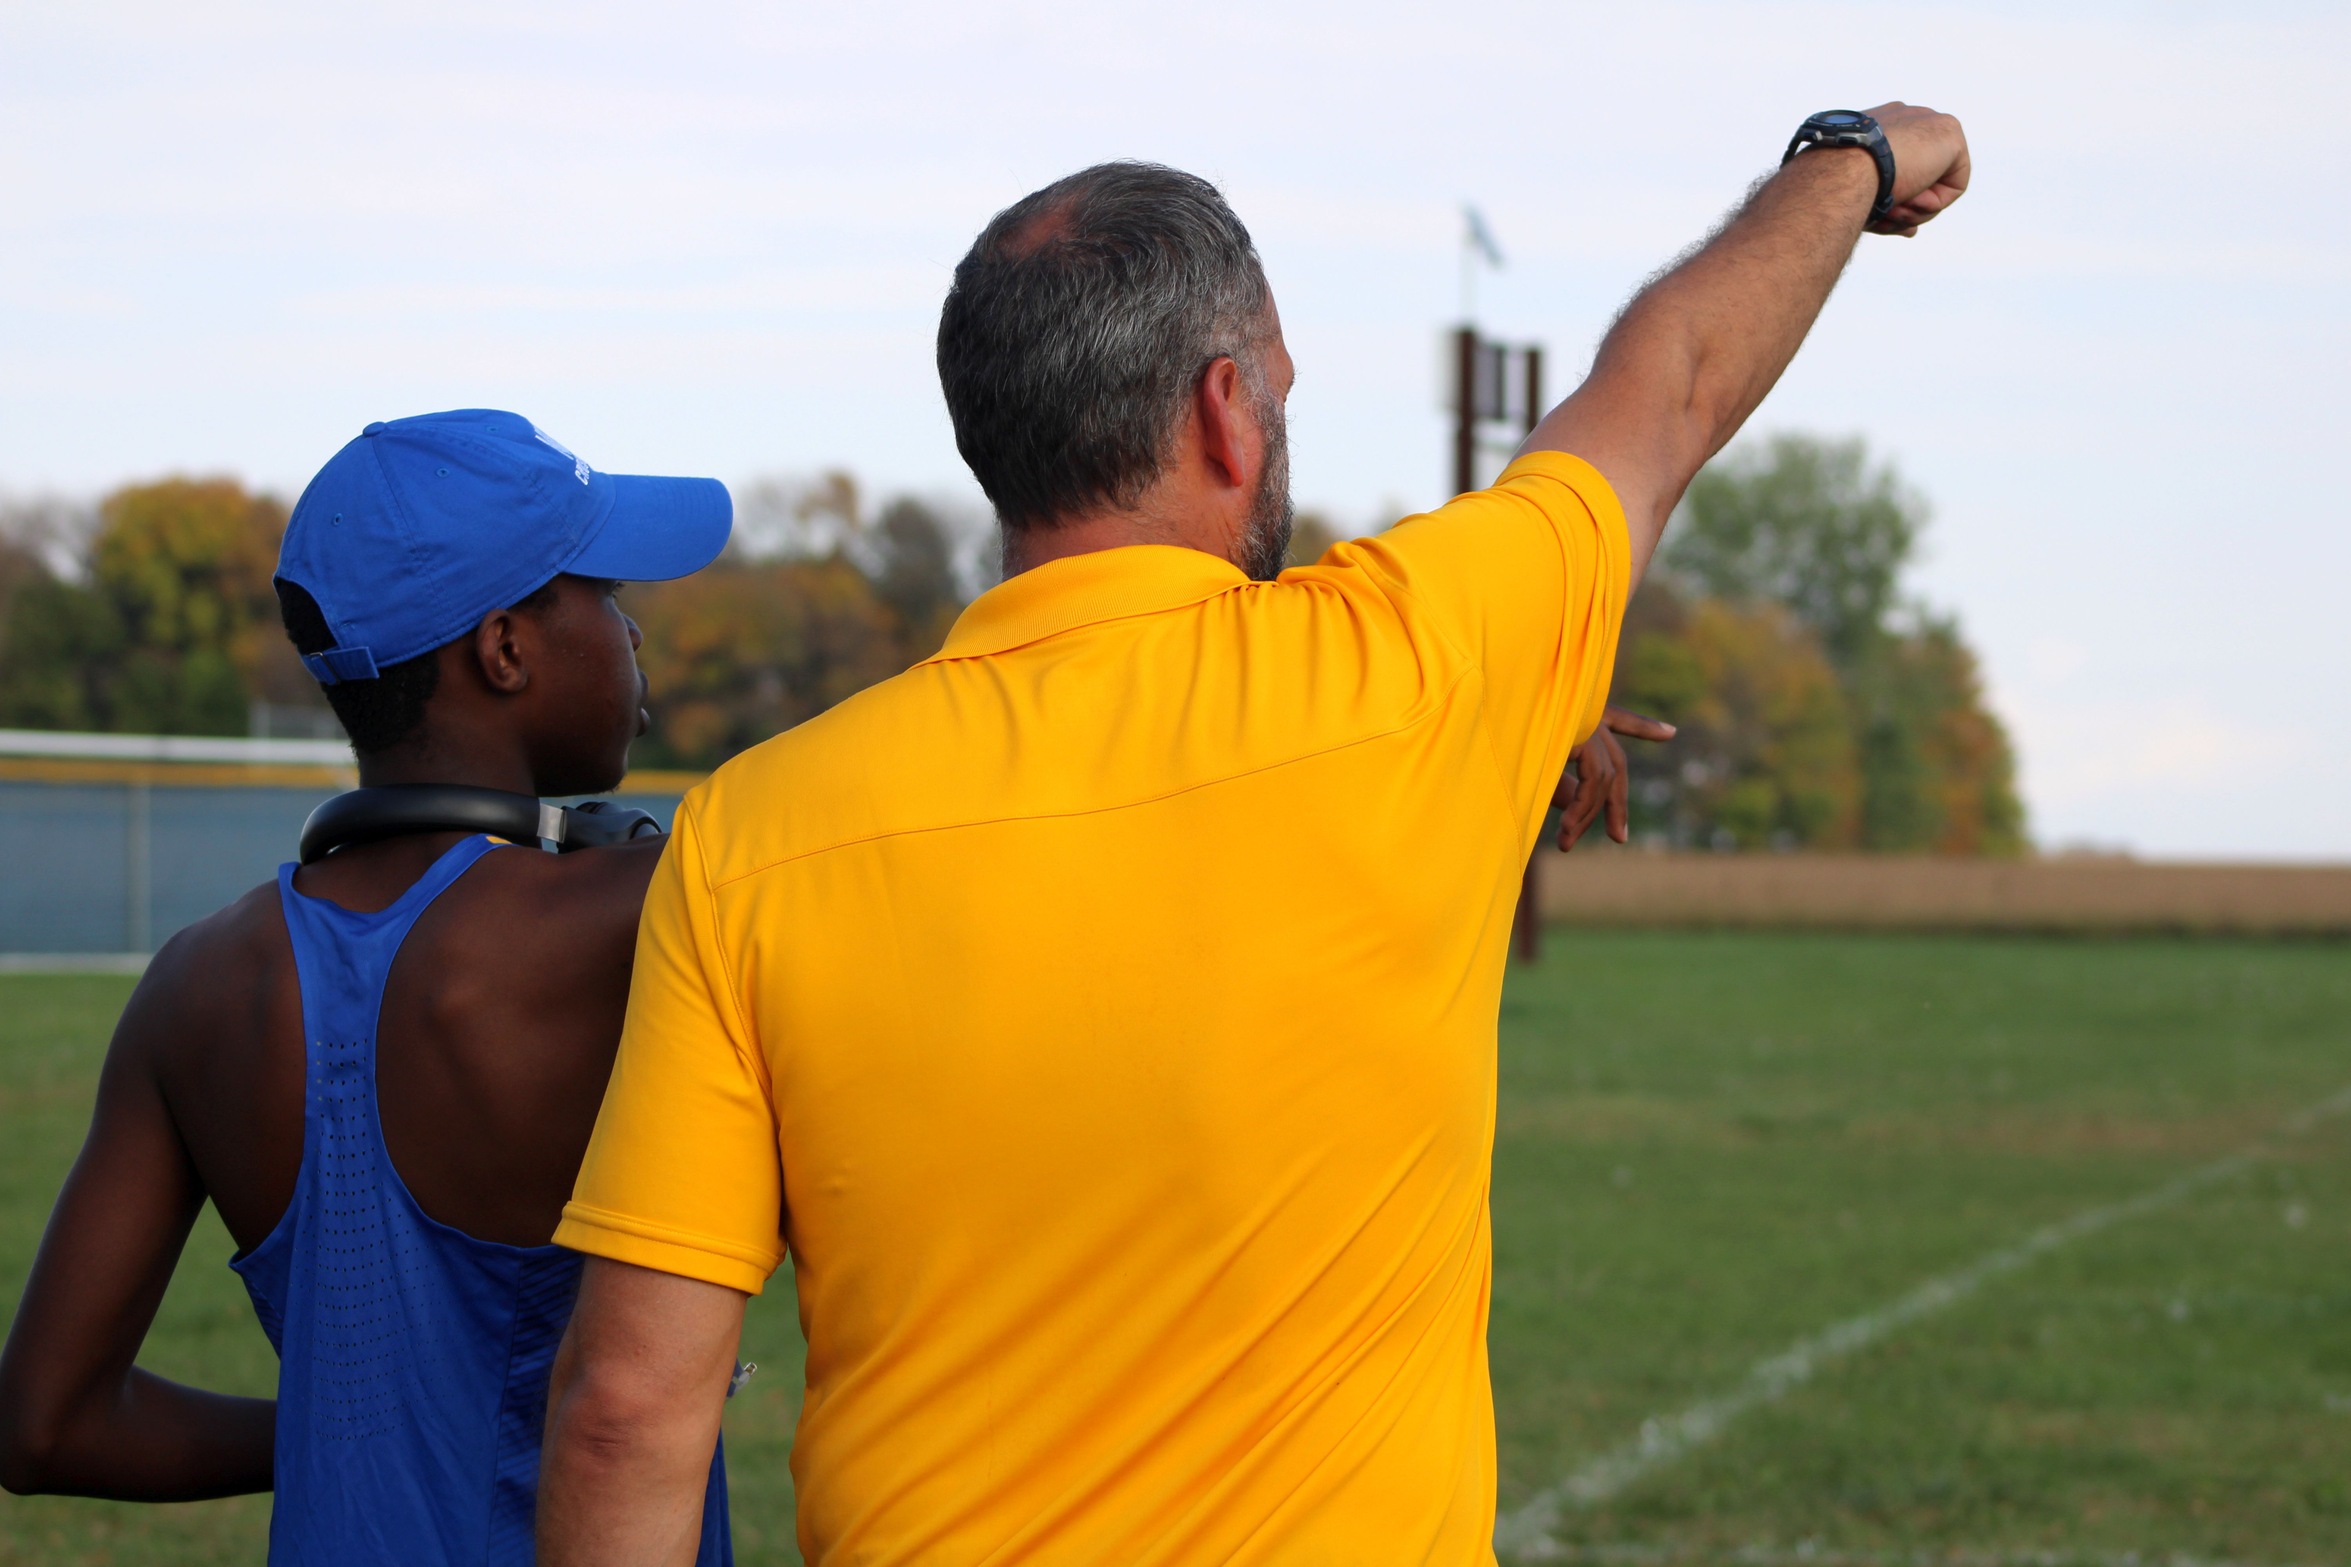 NIACC's Curtis Vais will be inducted into the NJCAA Cross Country/Track and Field Coaches Association Hall of Fame.